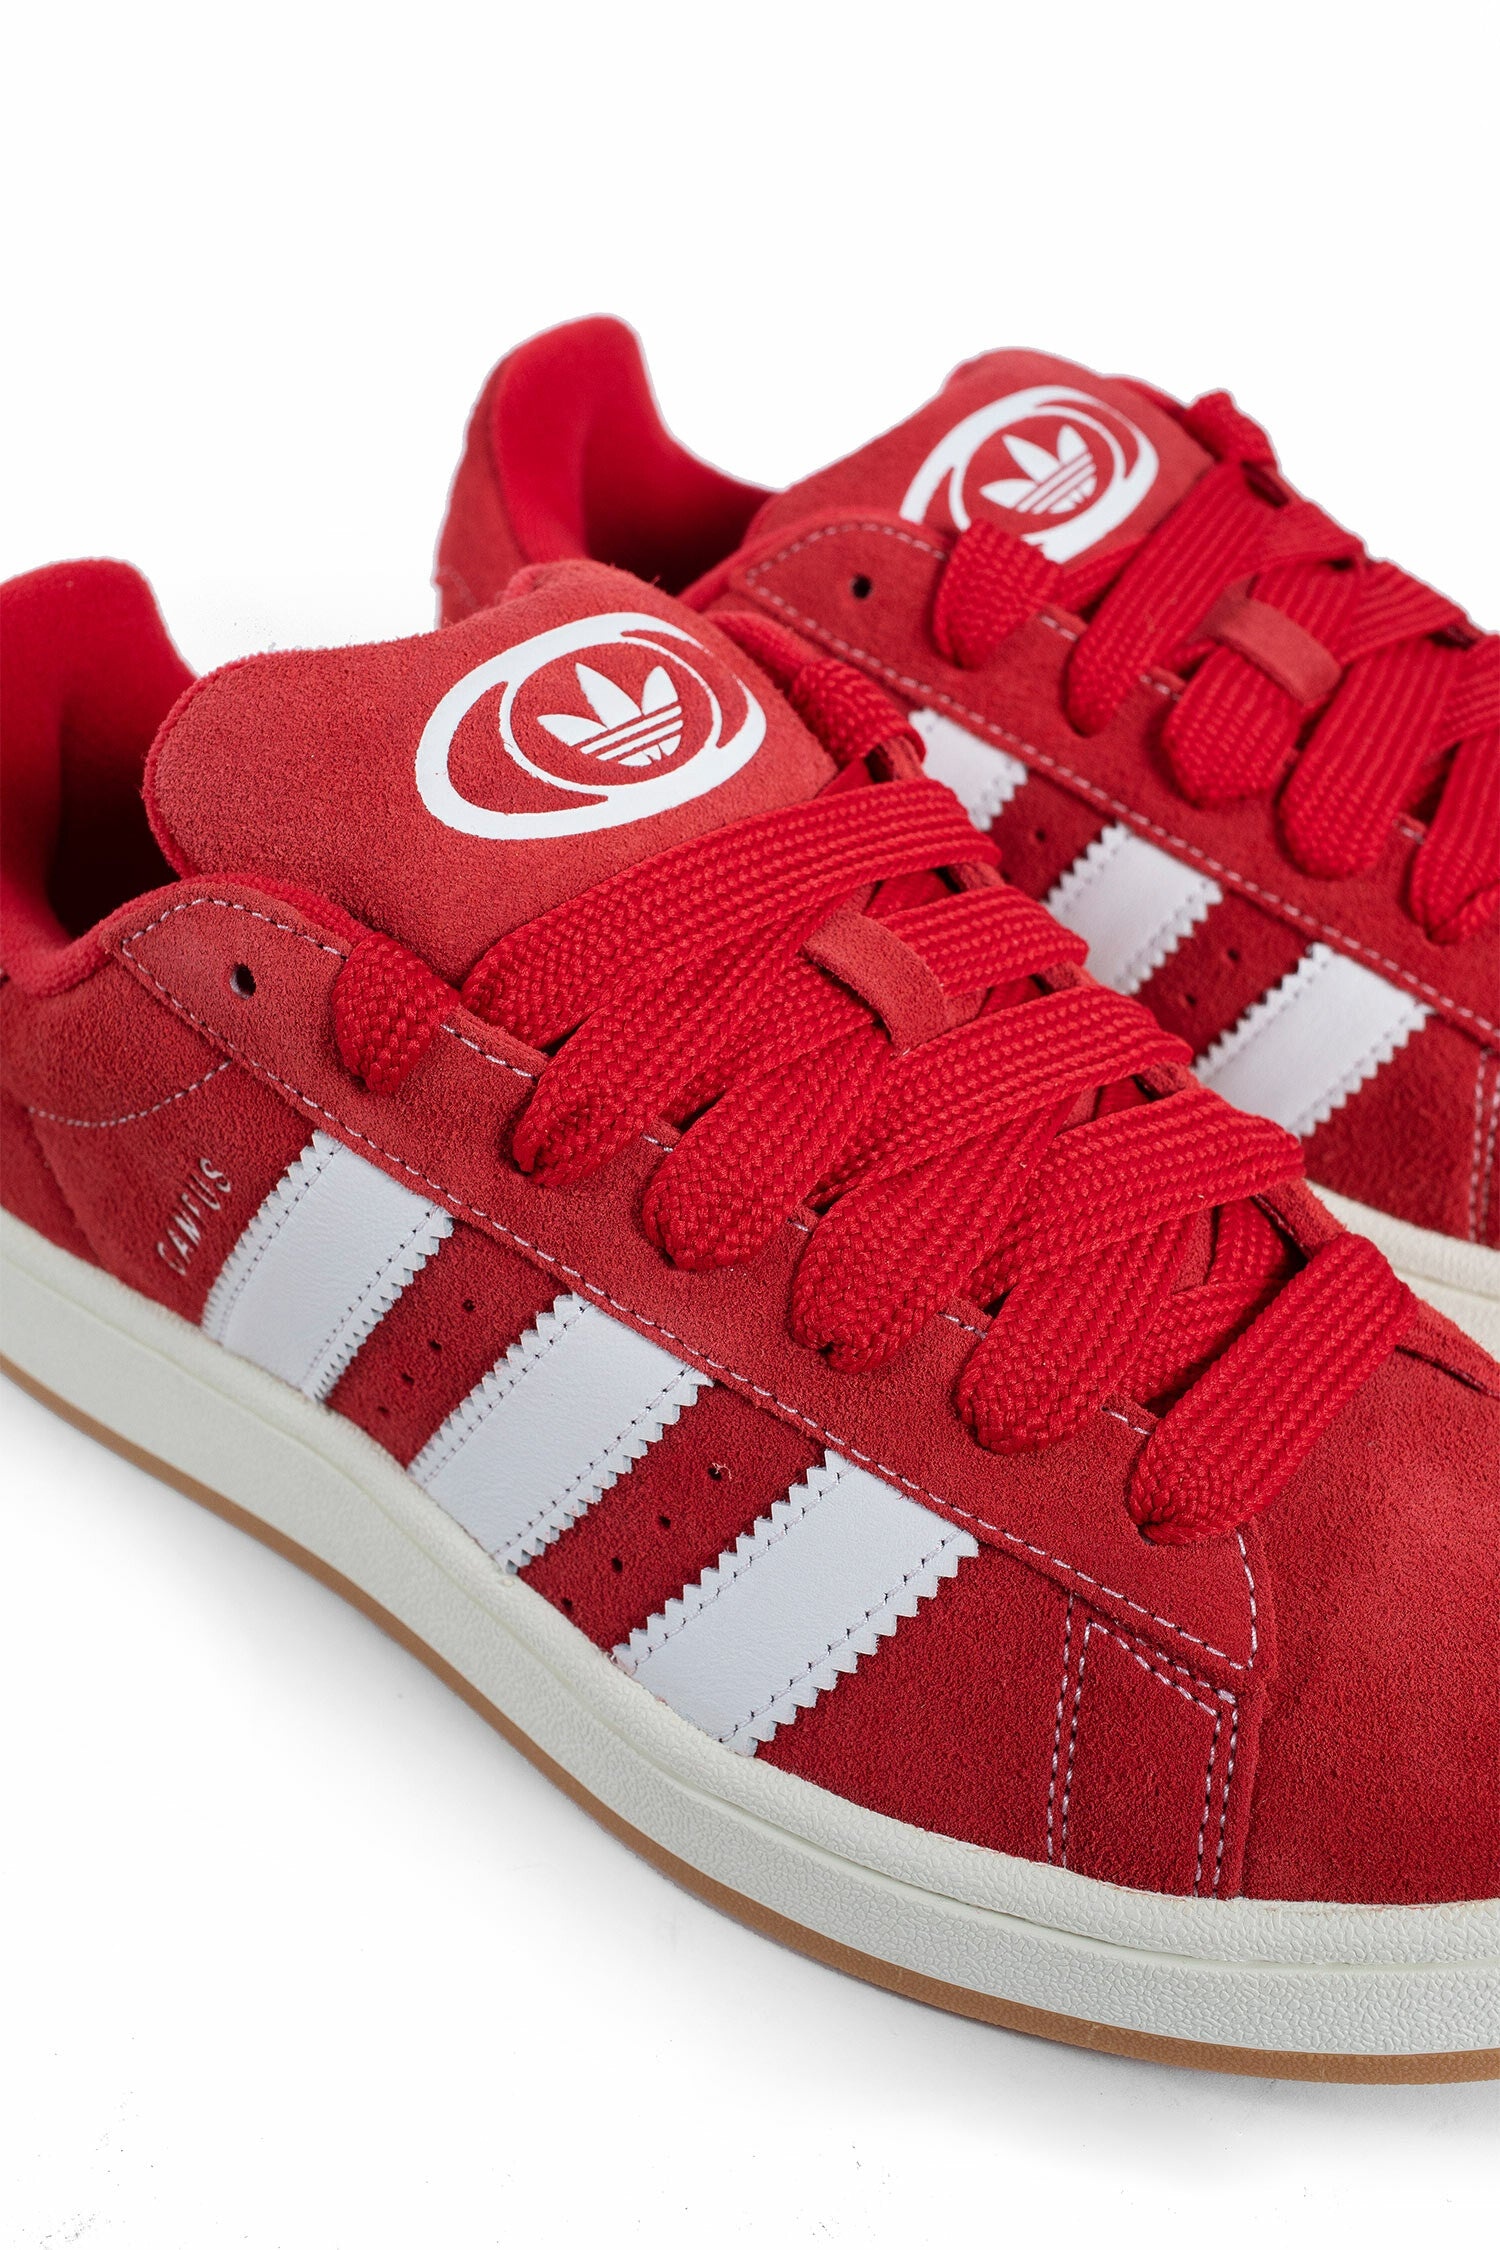 ADIDAS UNISEX RED SNEAKERS - 6